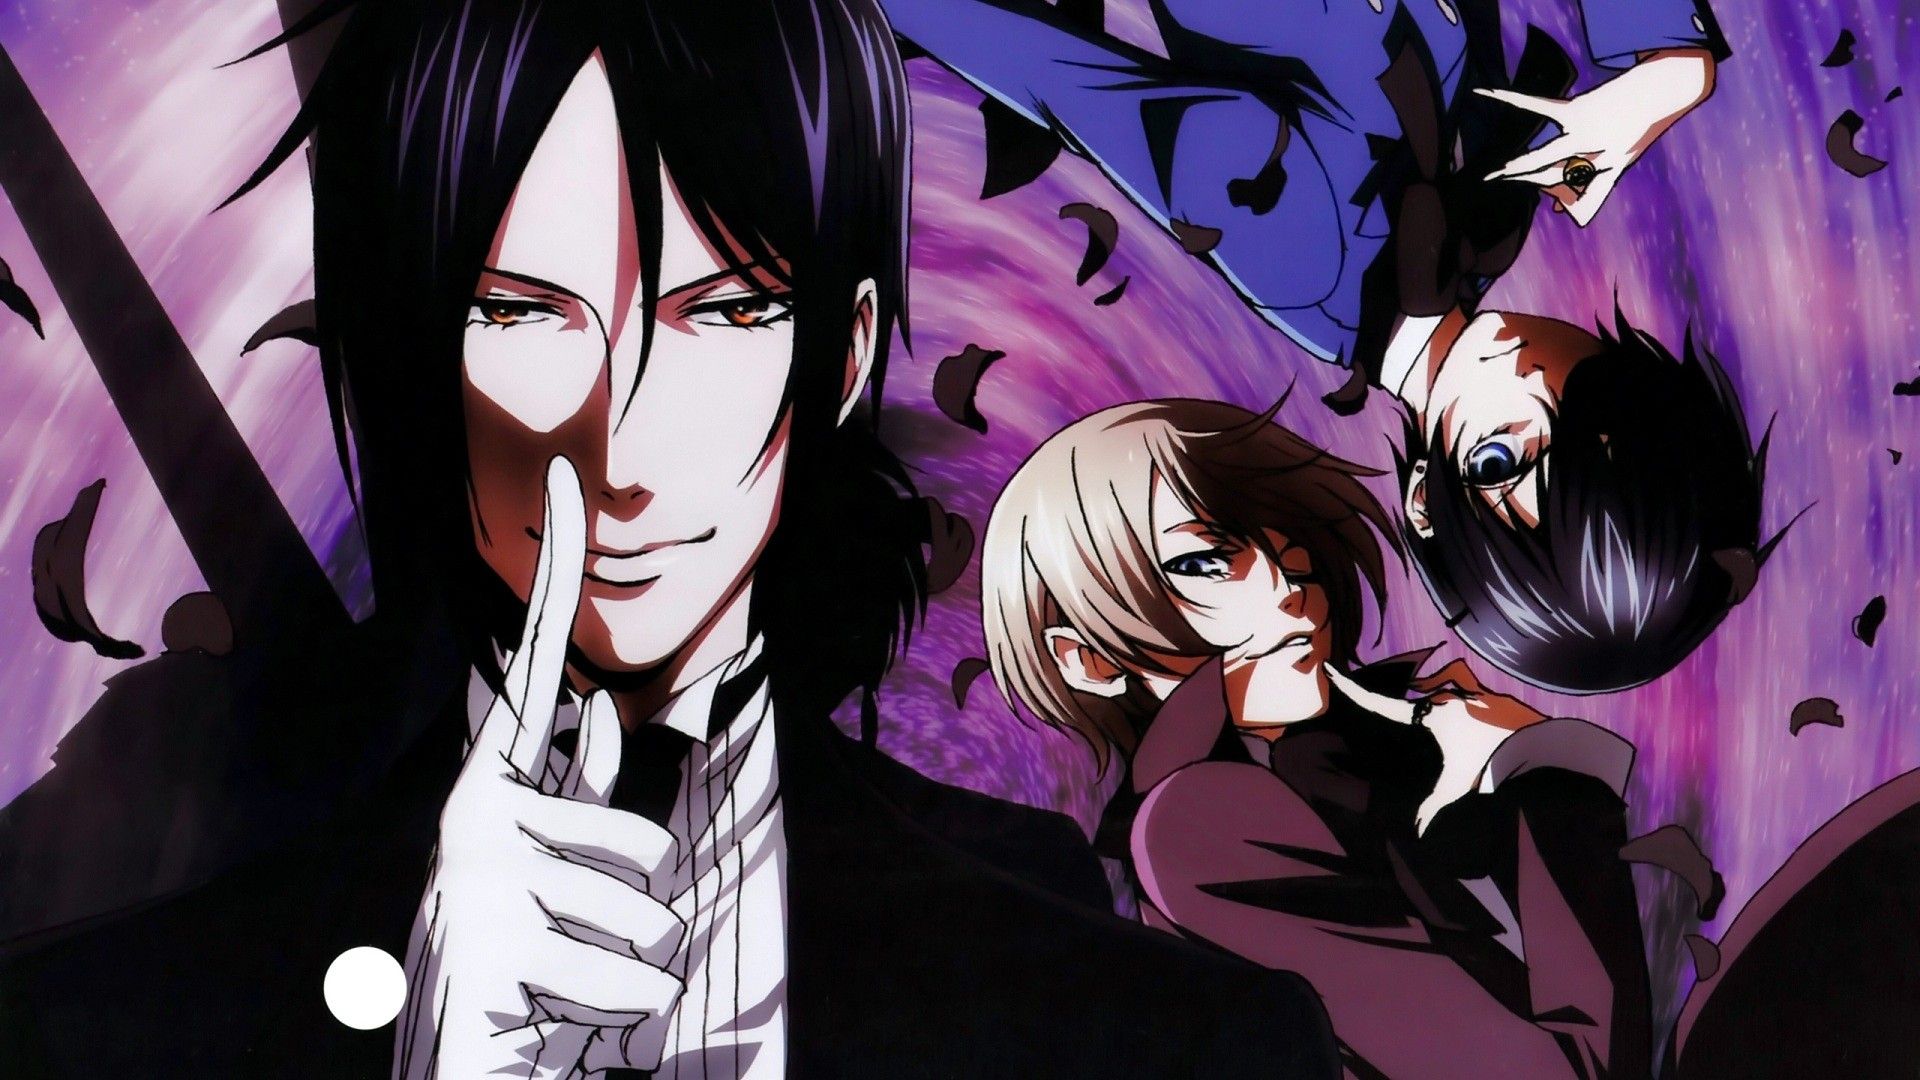 3 Ciel Phantomhive Wallpapers for iPhone and Android by Andrew Thompson